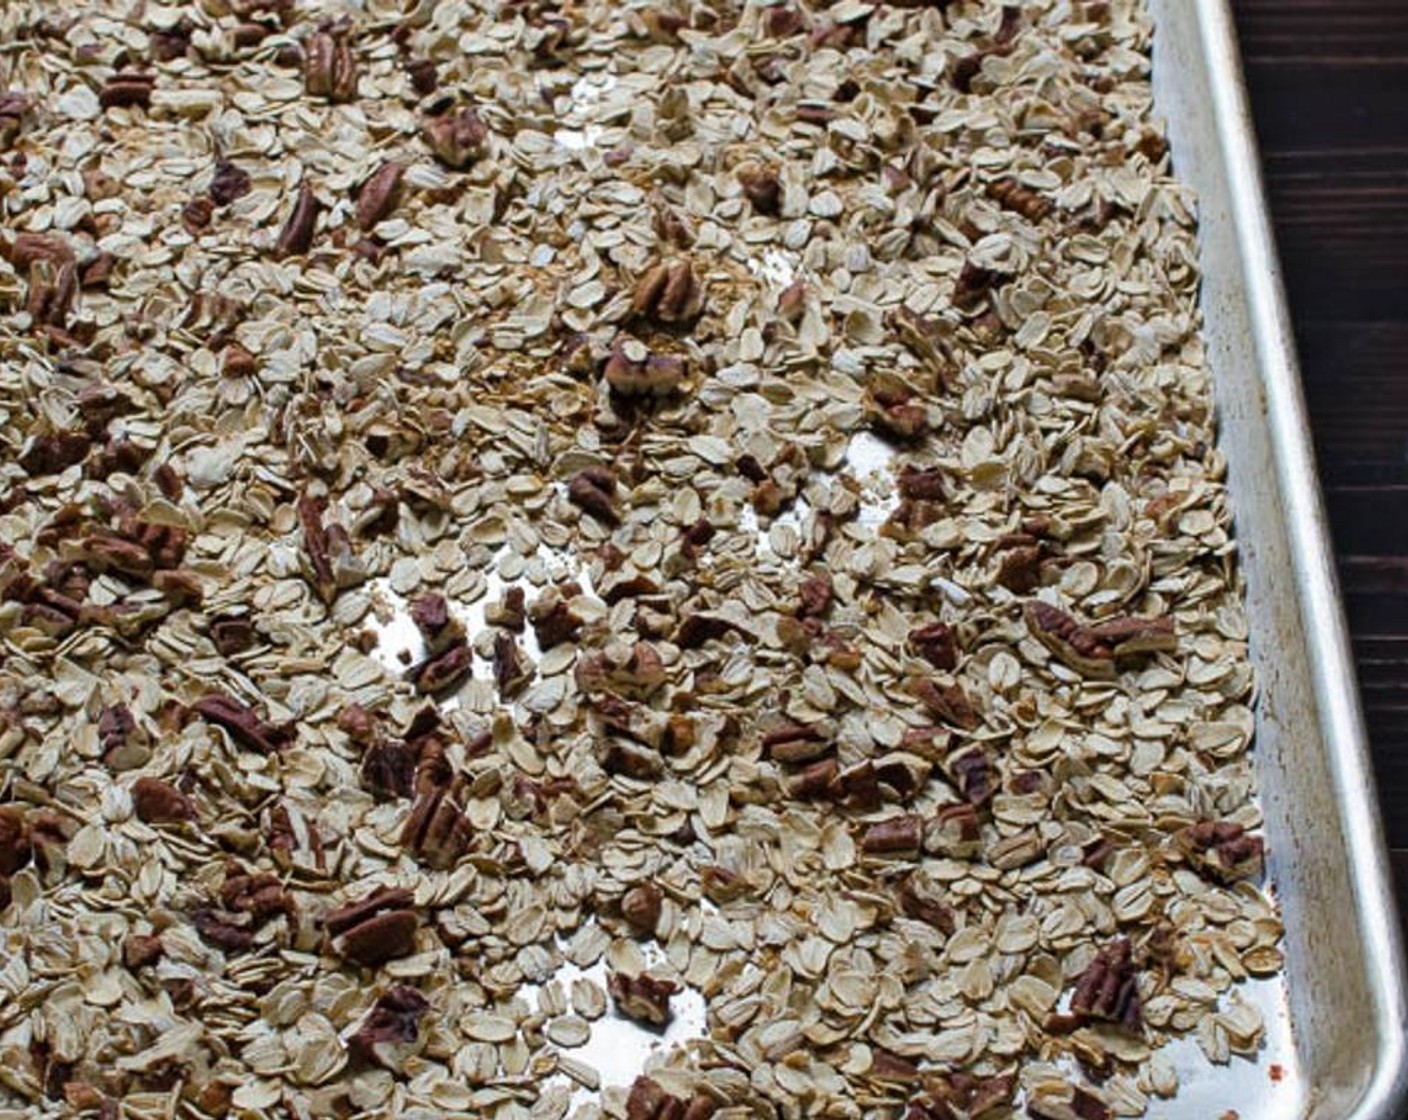 step 2 Spread the Old Fashioned Rolled Oats (2 cups) and Pecans (1 1/2 cups) in an even layer on a baking sheet and toast in the oven for 10-12 minutes. Set aside.